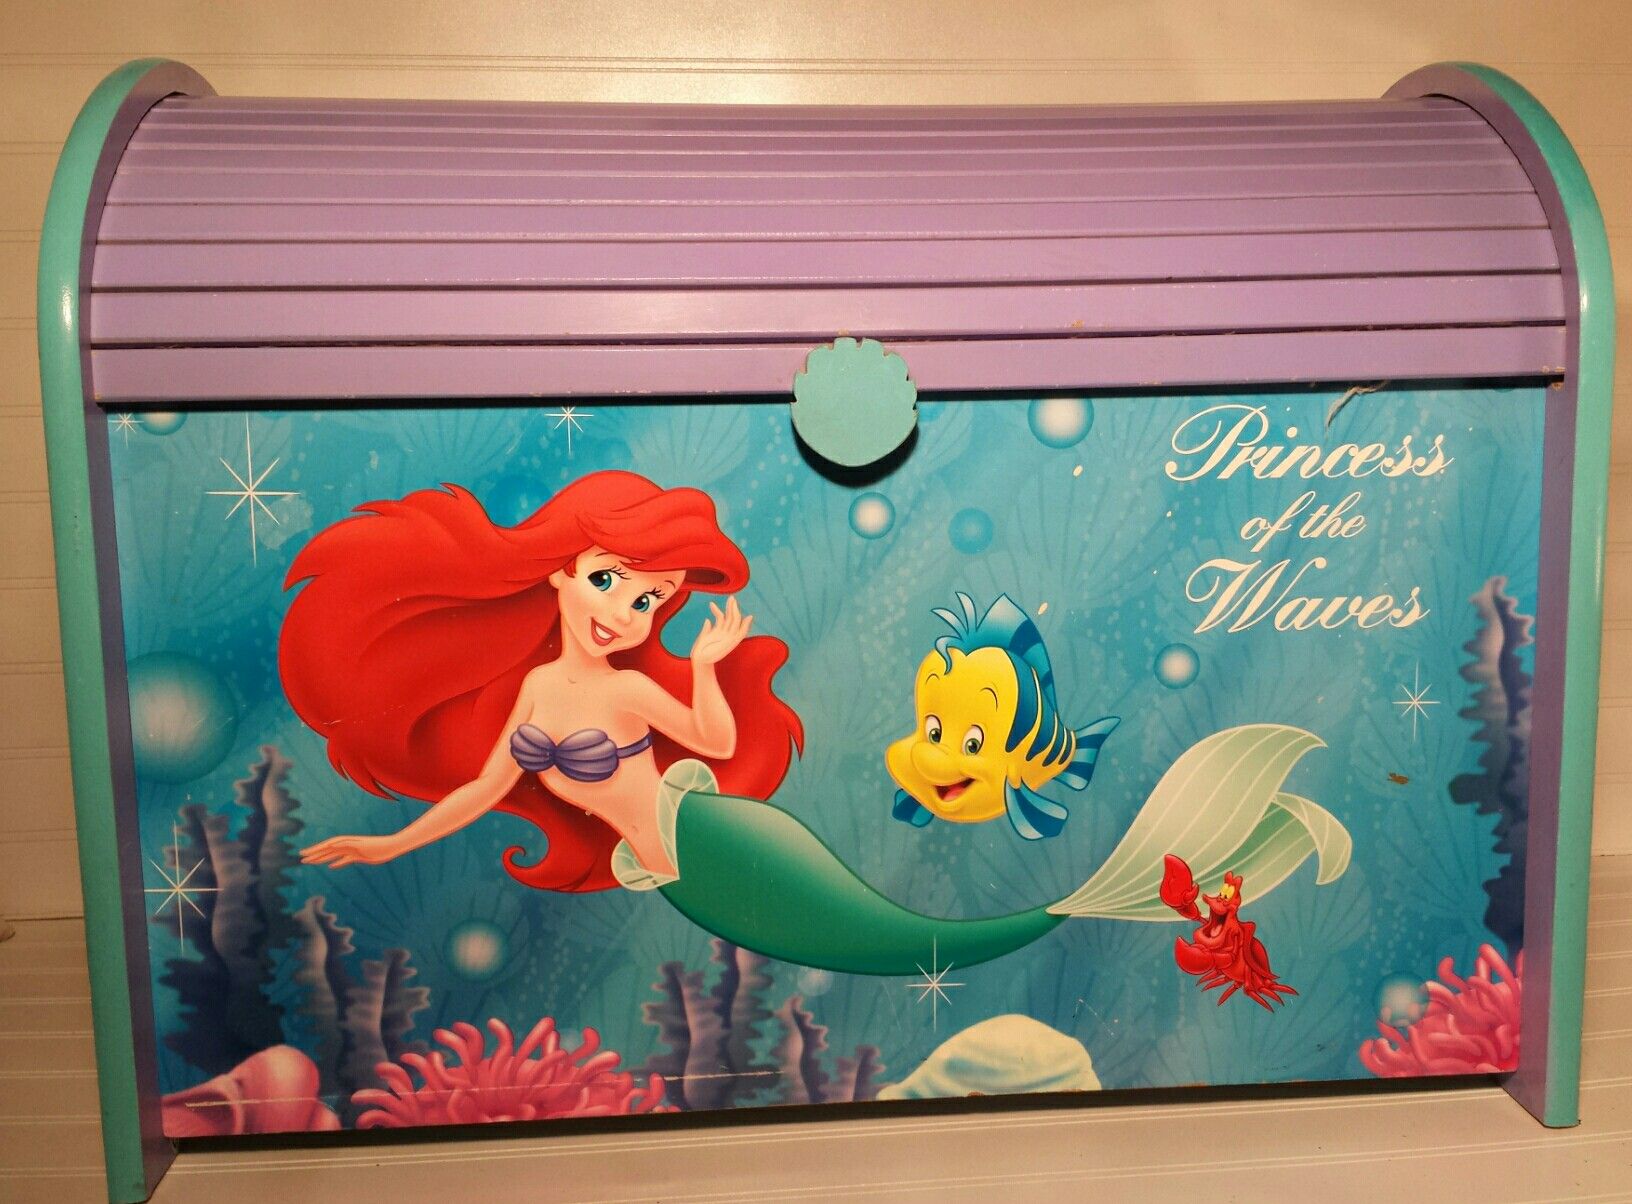 Little mermaid wooden roll top toy box, toy chest , roll top storage chest